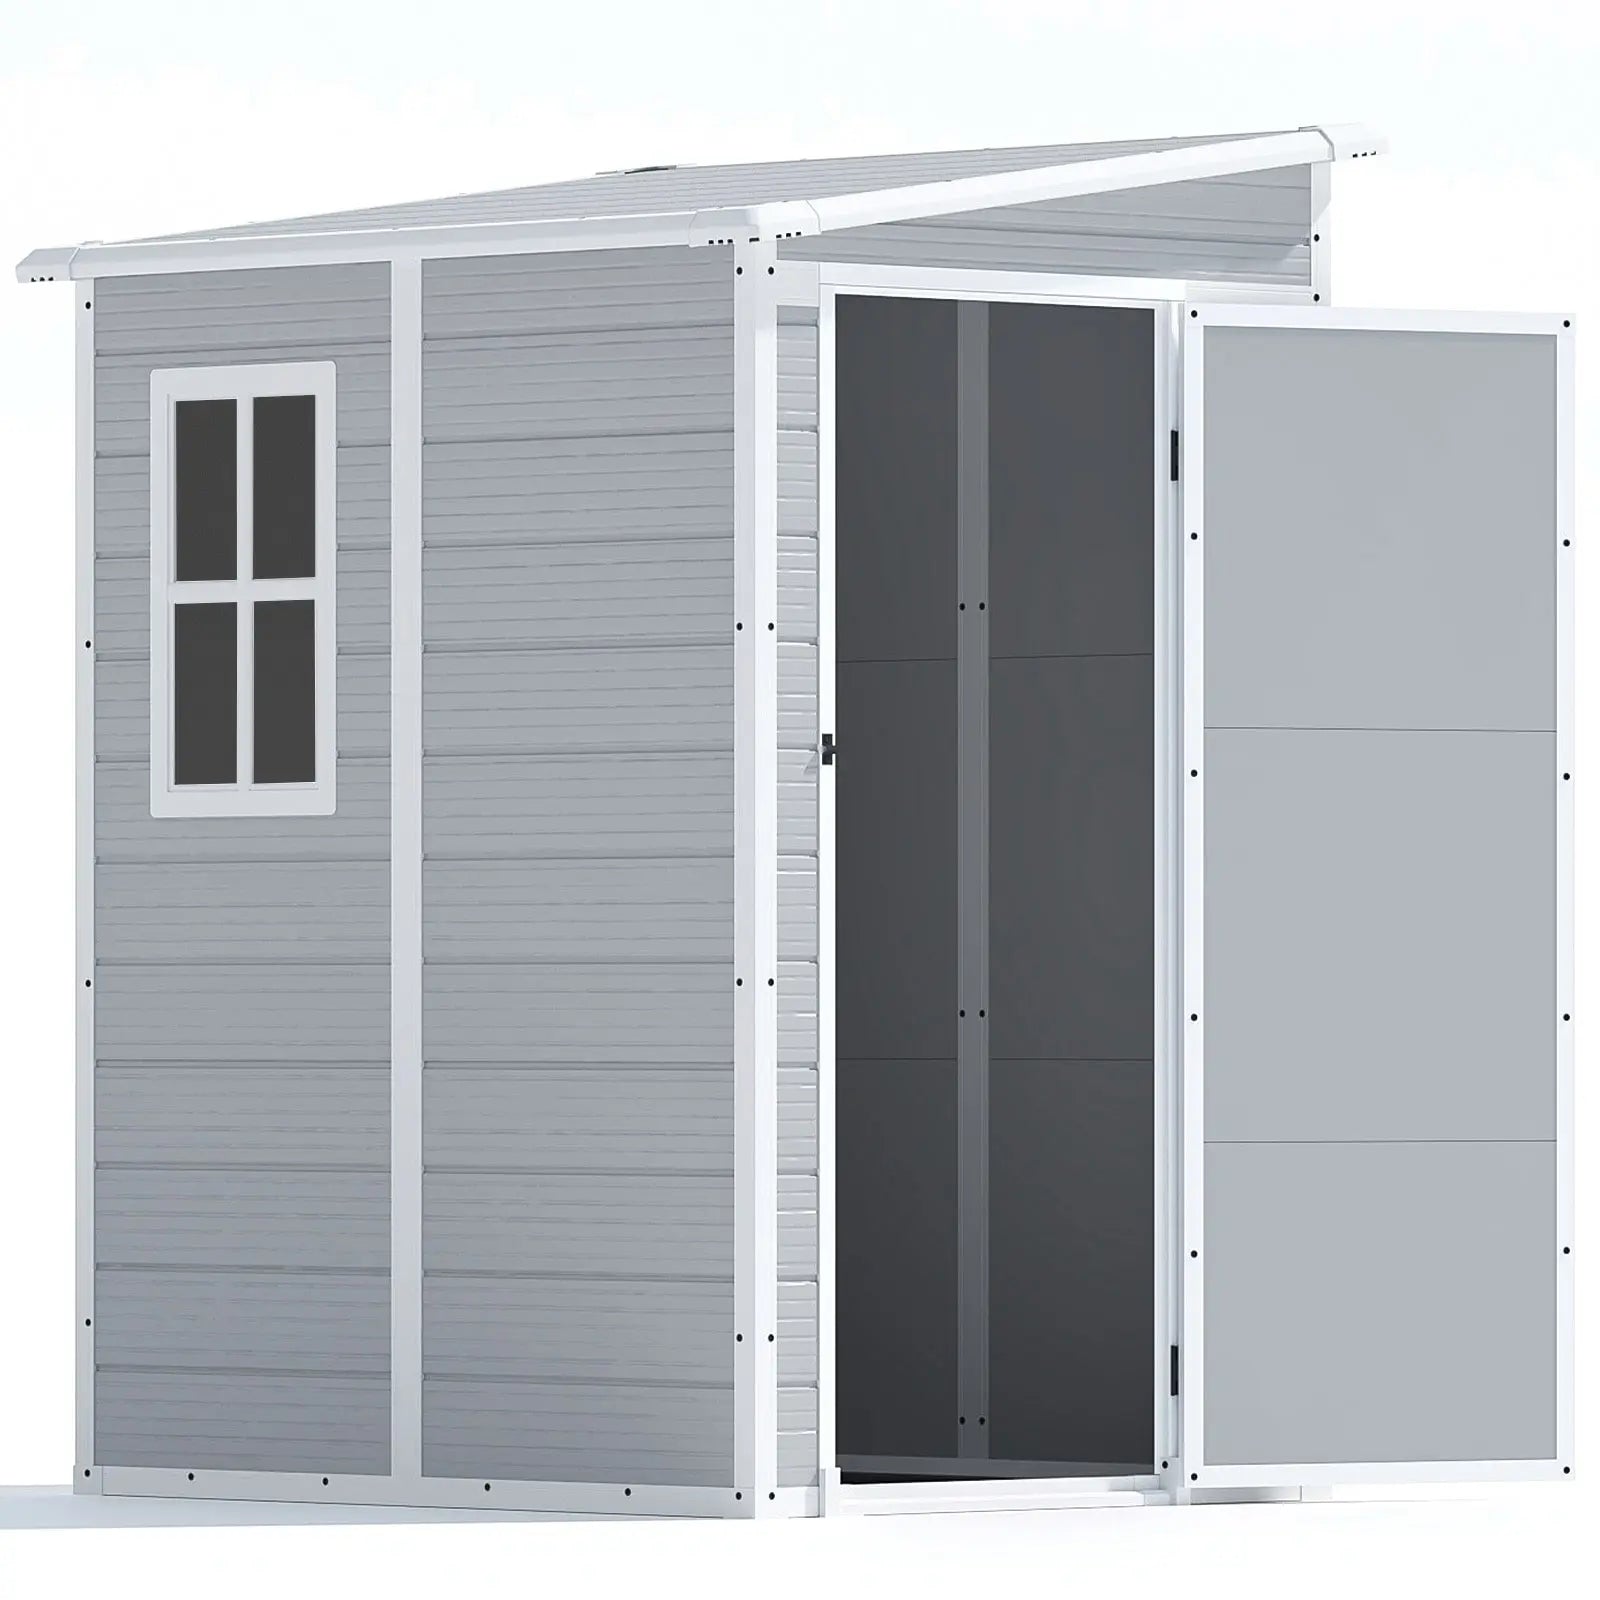 Patiowell 5x4 Plastic Shed-2